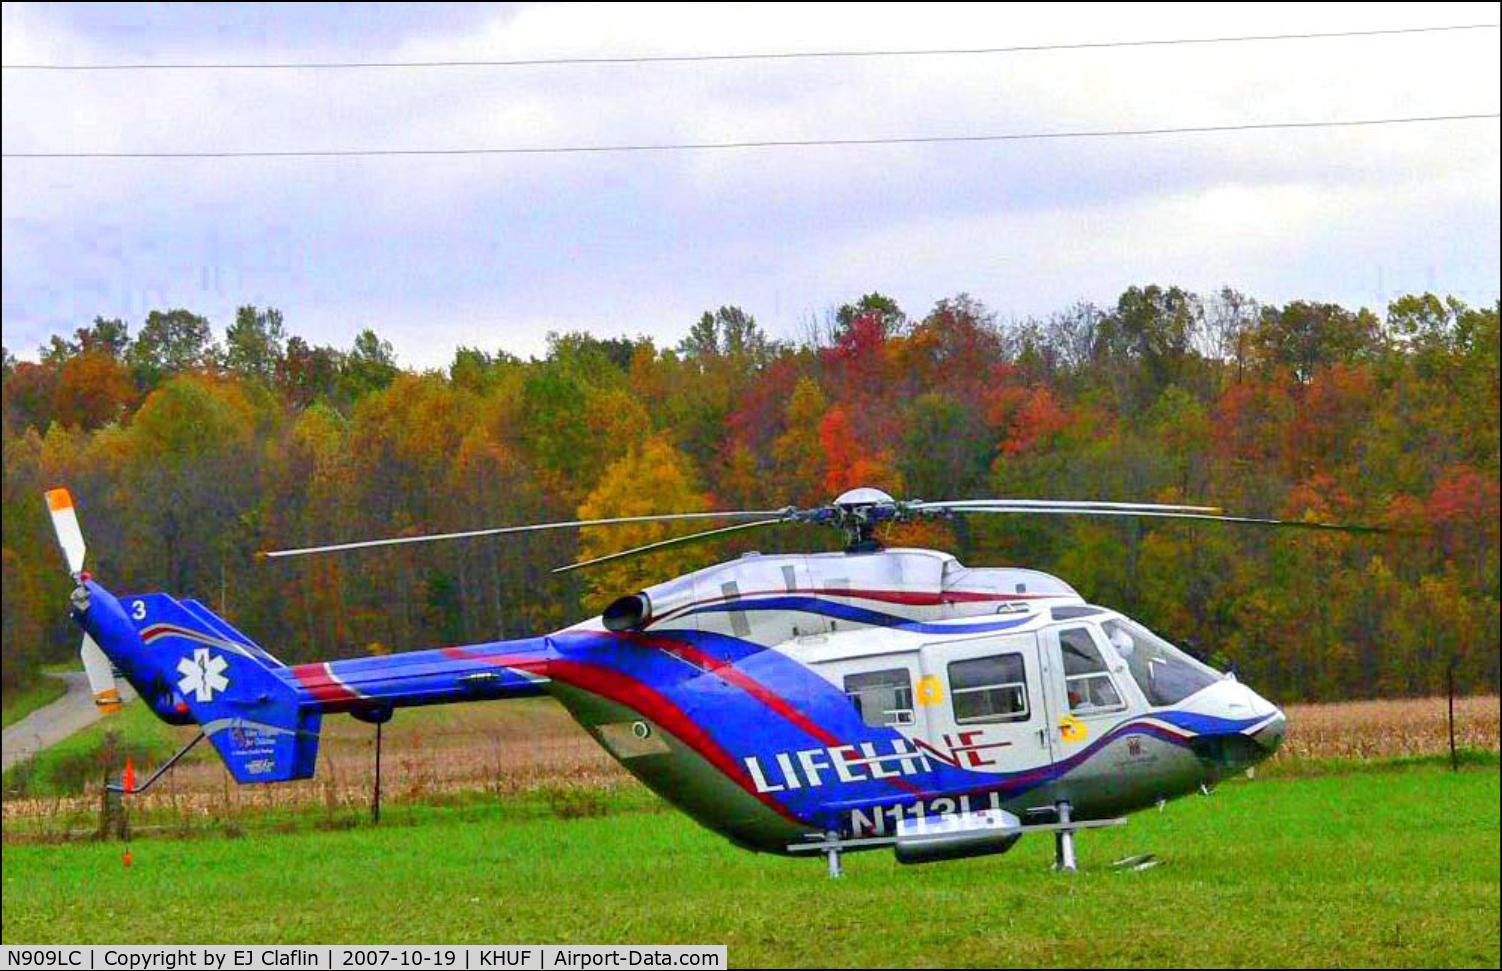 N909LC, 1983 Eurocopter-Kawasaki BK-117A-4 C/N 7013, in its former lifetime, N909LC flew as LifeLine 3 (N113LL) out of Terre Haute, Indiana for Clarian Health.  It was replaced in 2010 by a new delivery EC 145